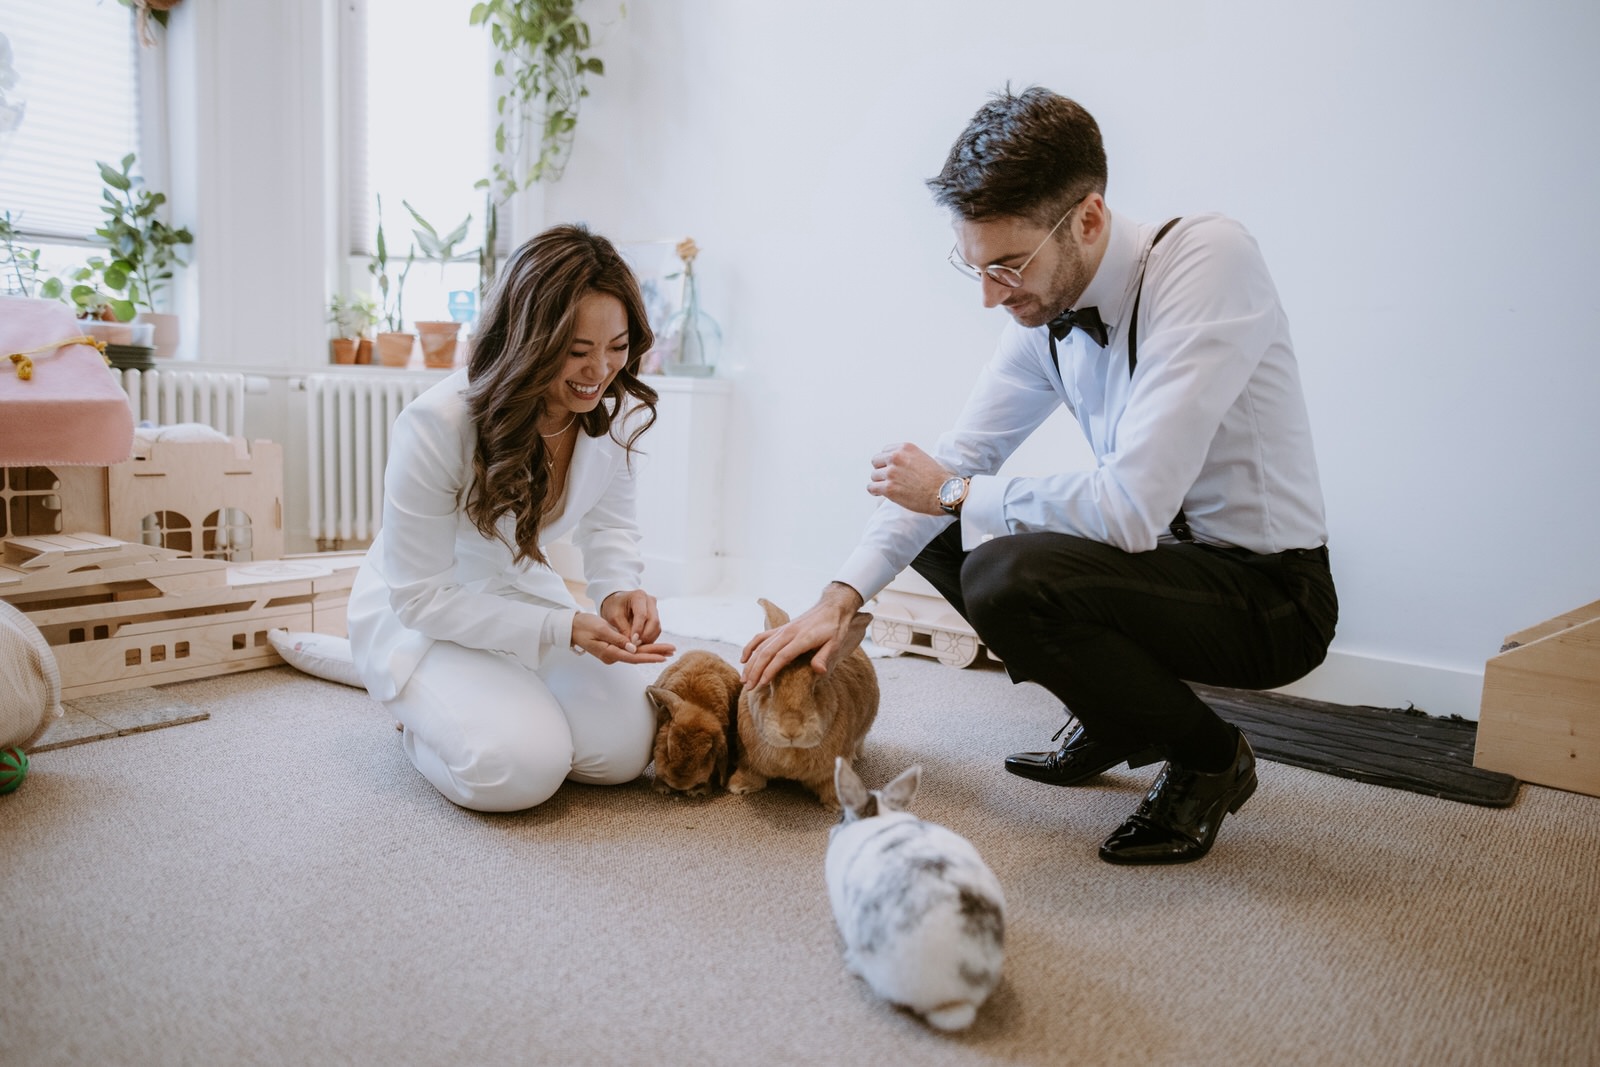 bride and groom with their bunnies in their apartment before they leave to get married in the city hall